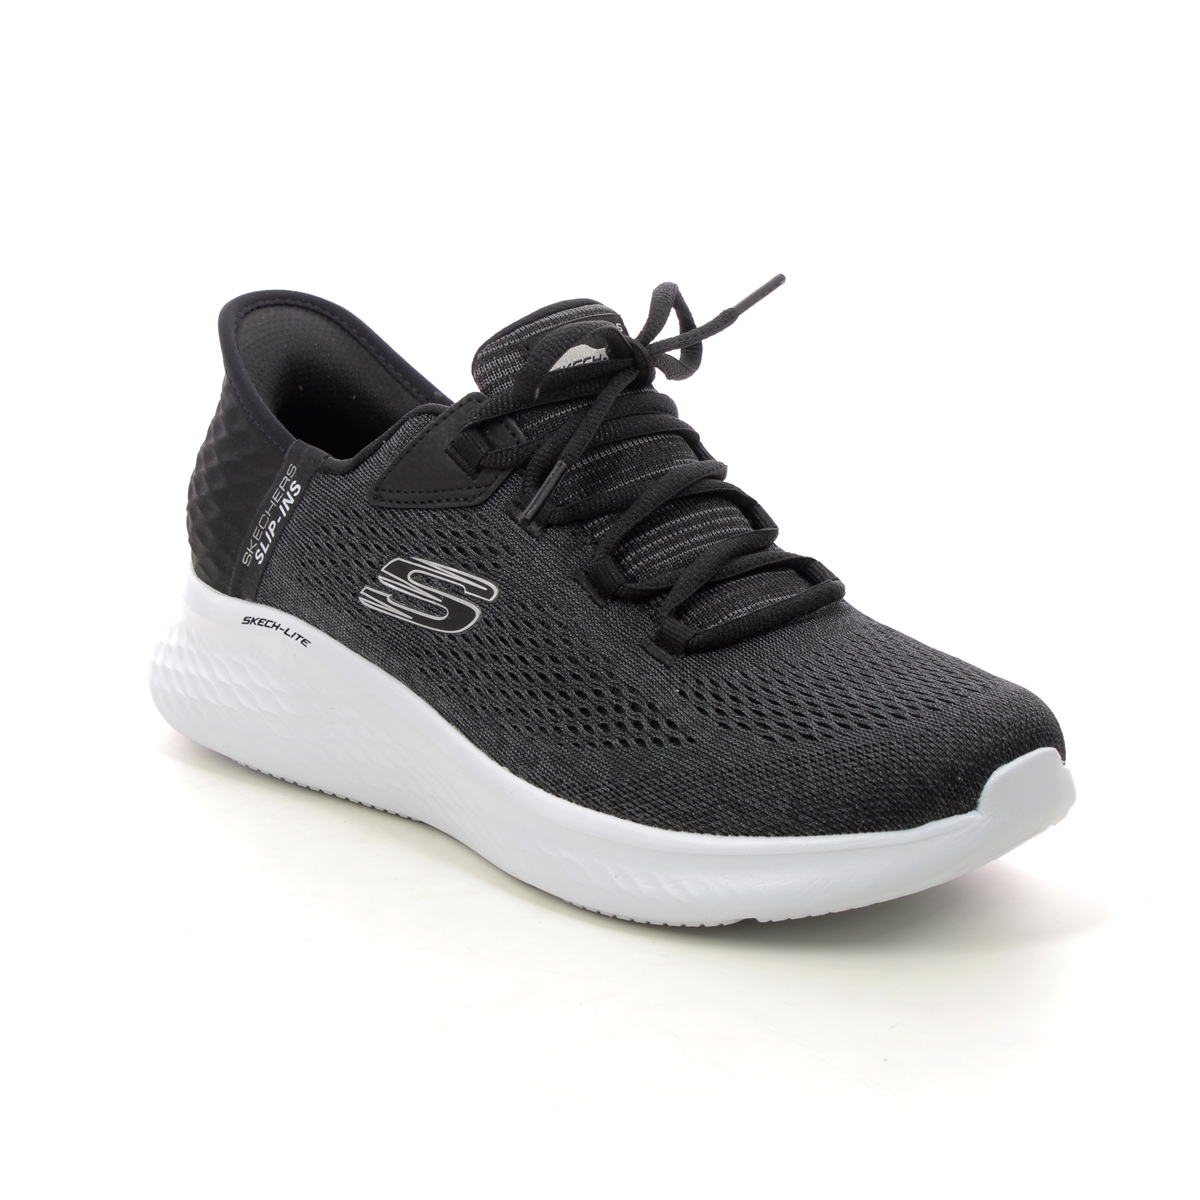 Skechers Slip Ins Lace BKW Black White Womens trainers 150012 in a Plain Textile in Size 4